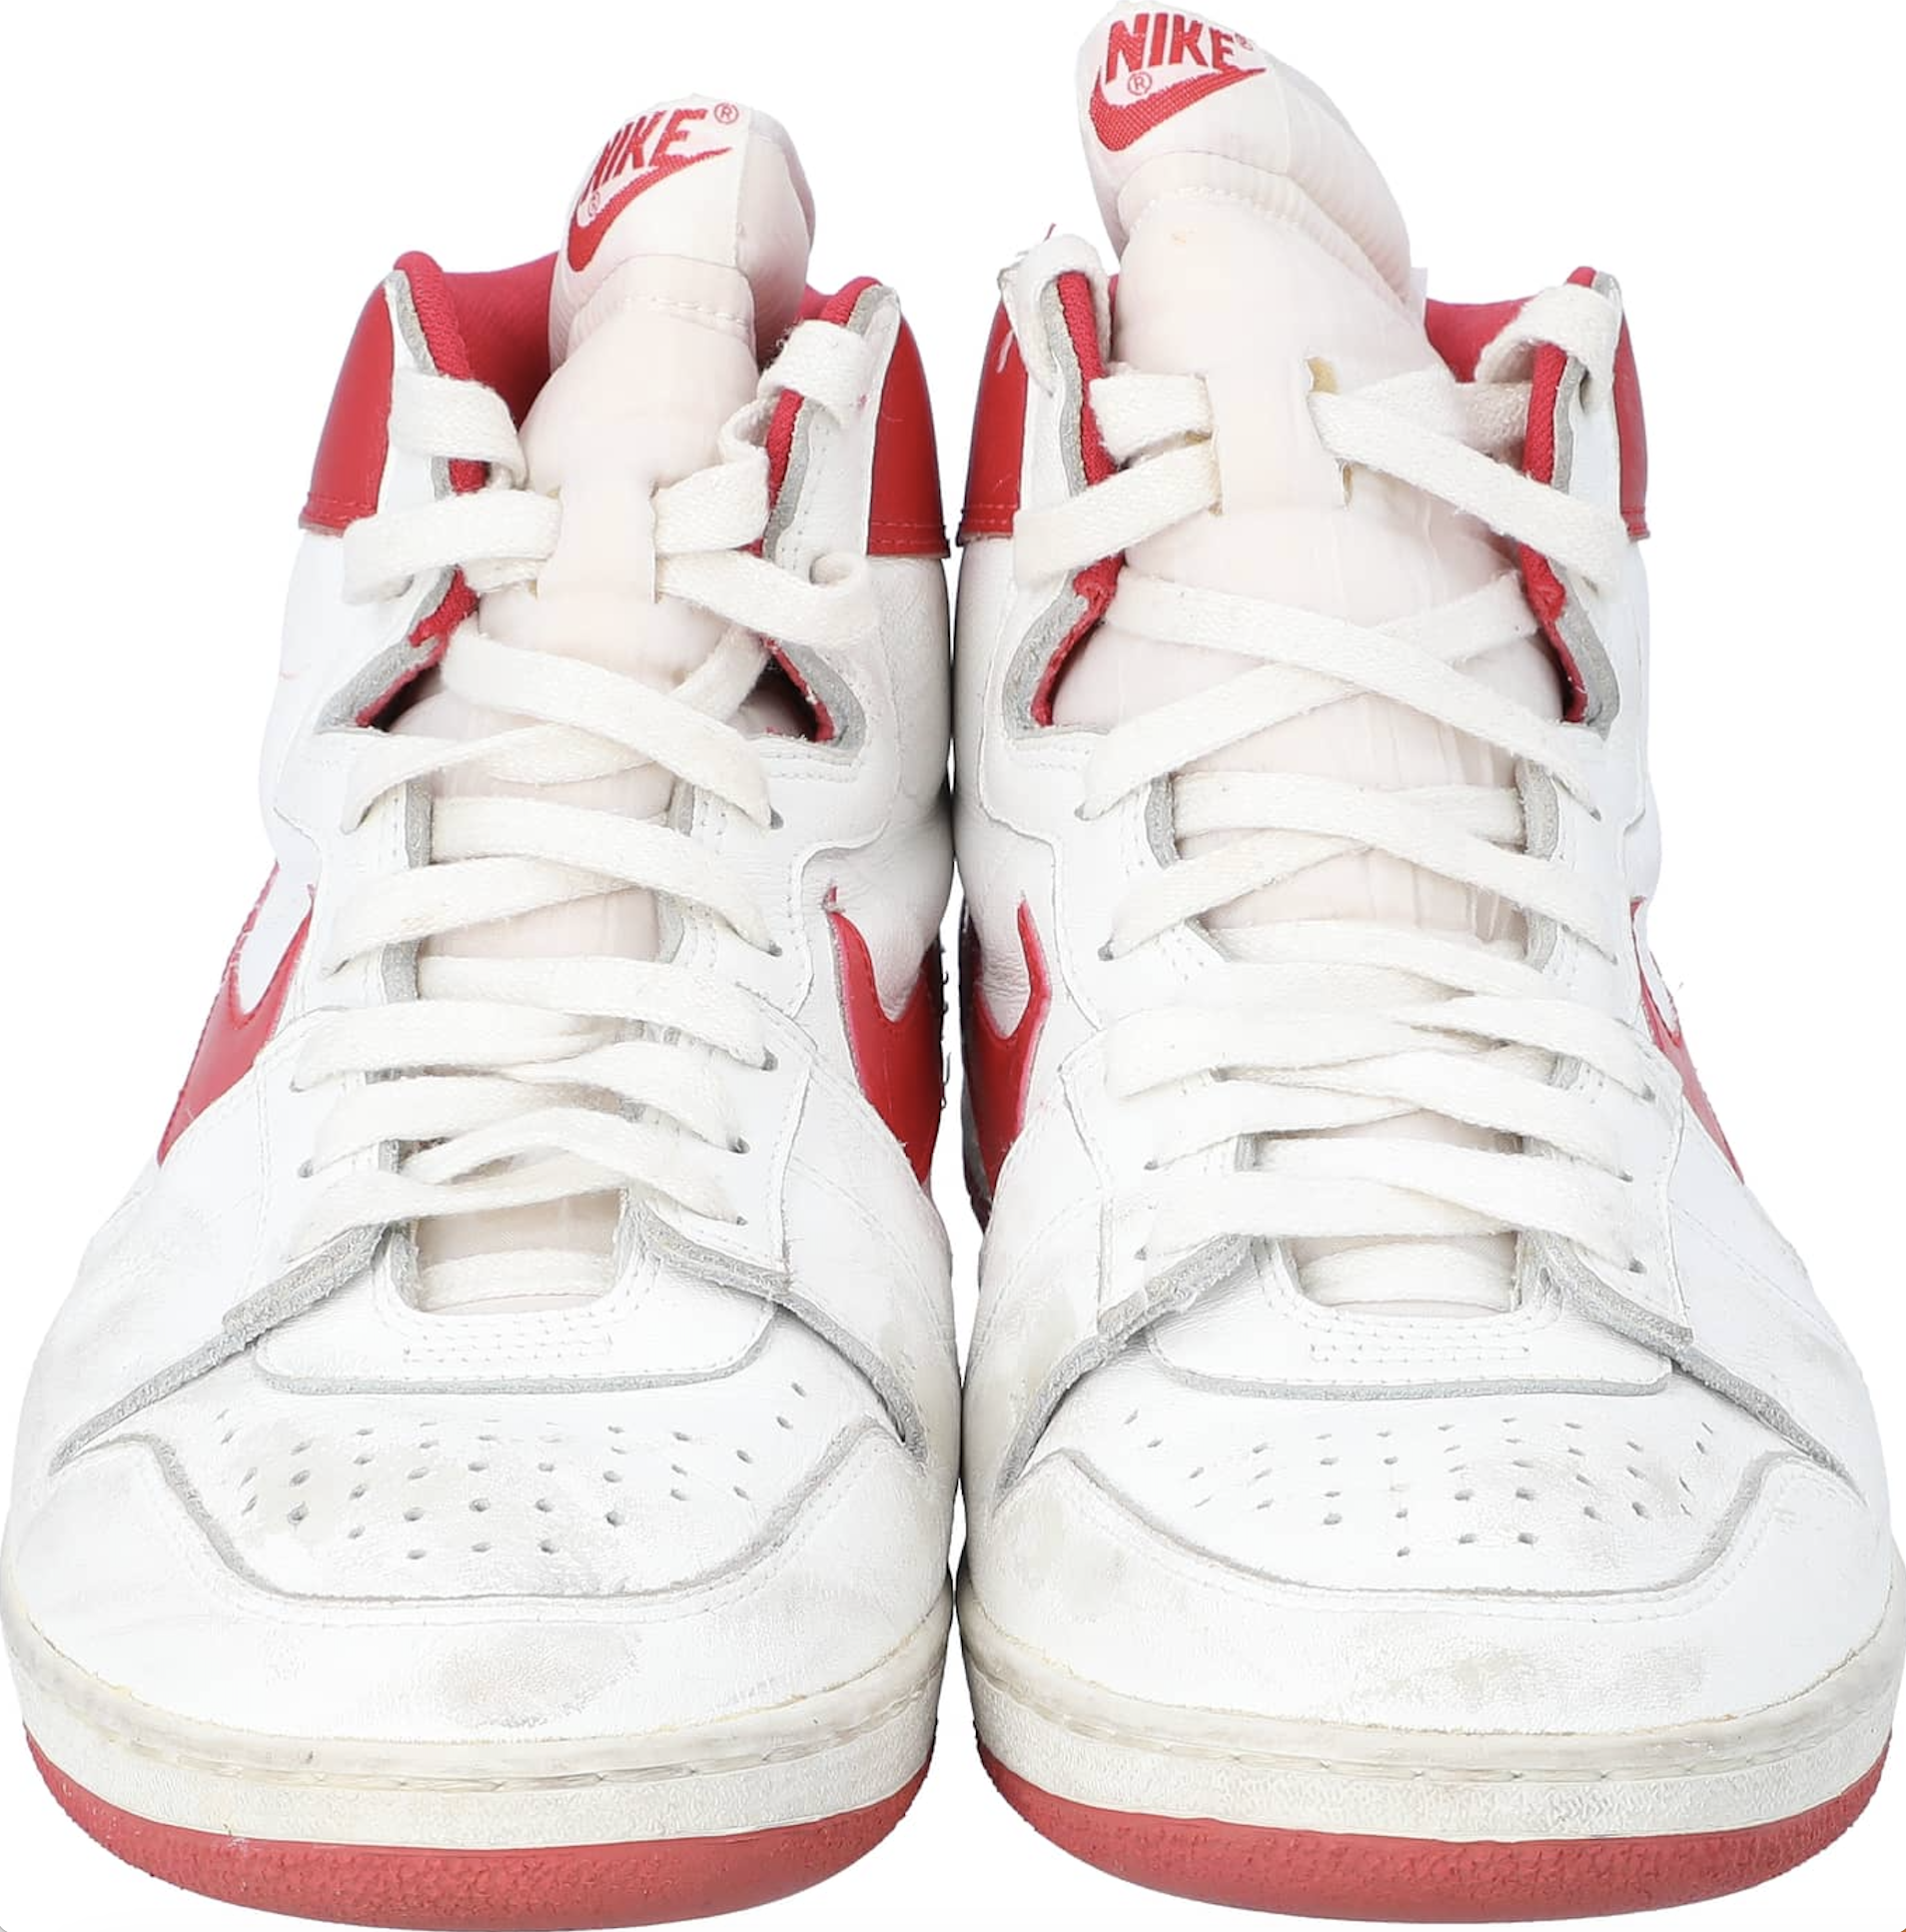 Michael Jordan's Nike Air Ships Just Sold for a Record $1.5 Million